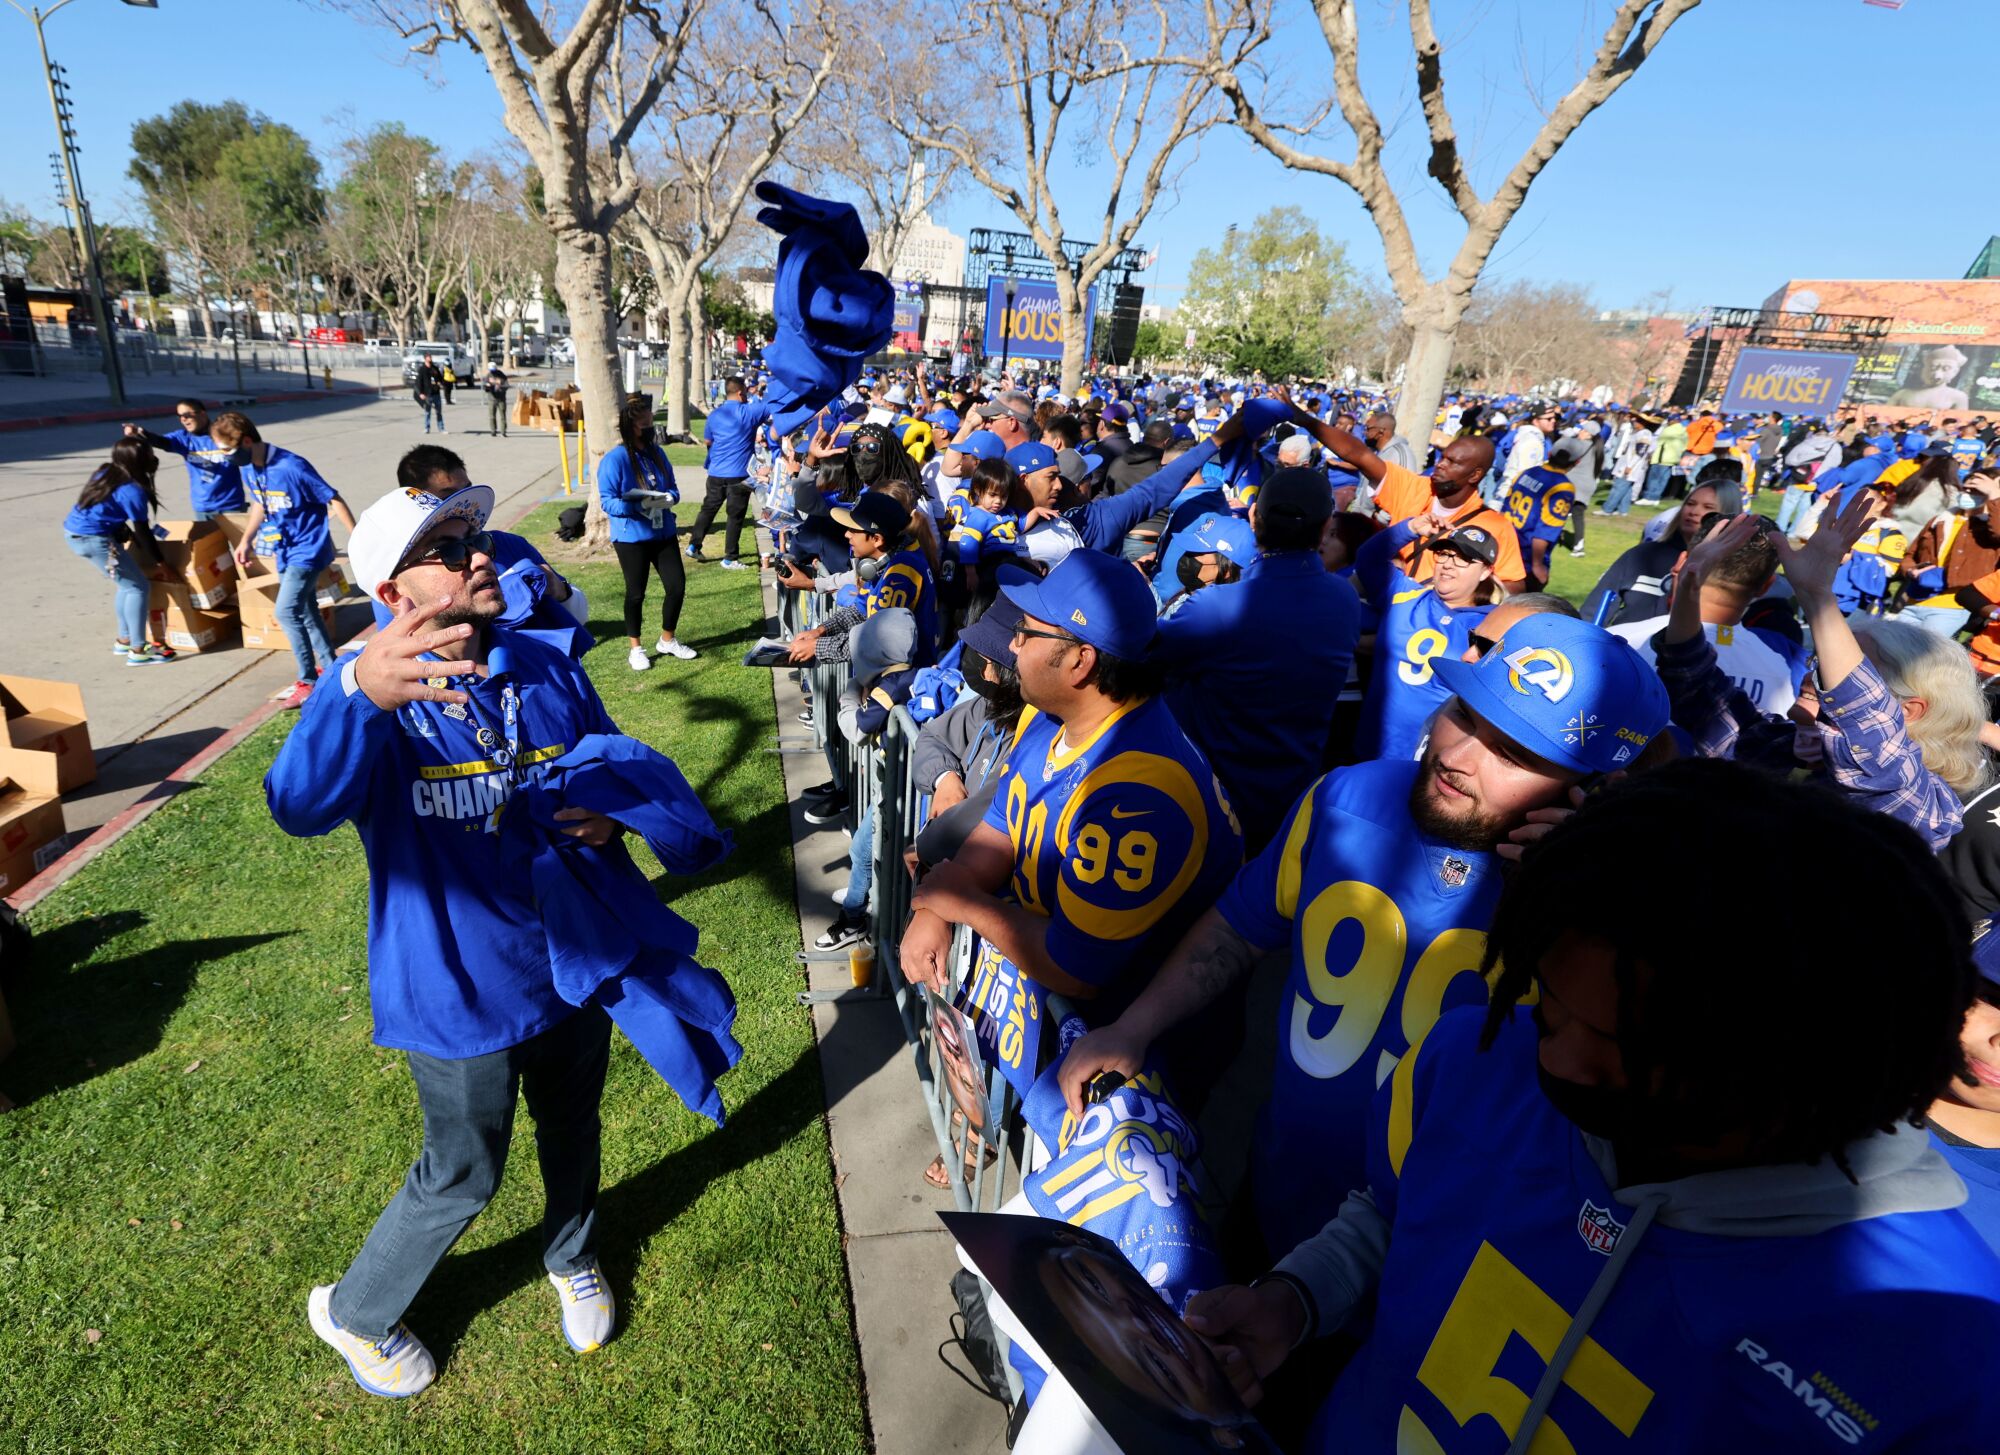 People in Rams gear gather in a park